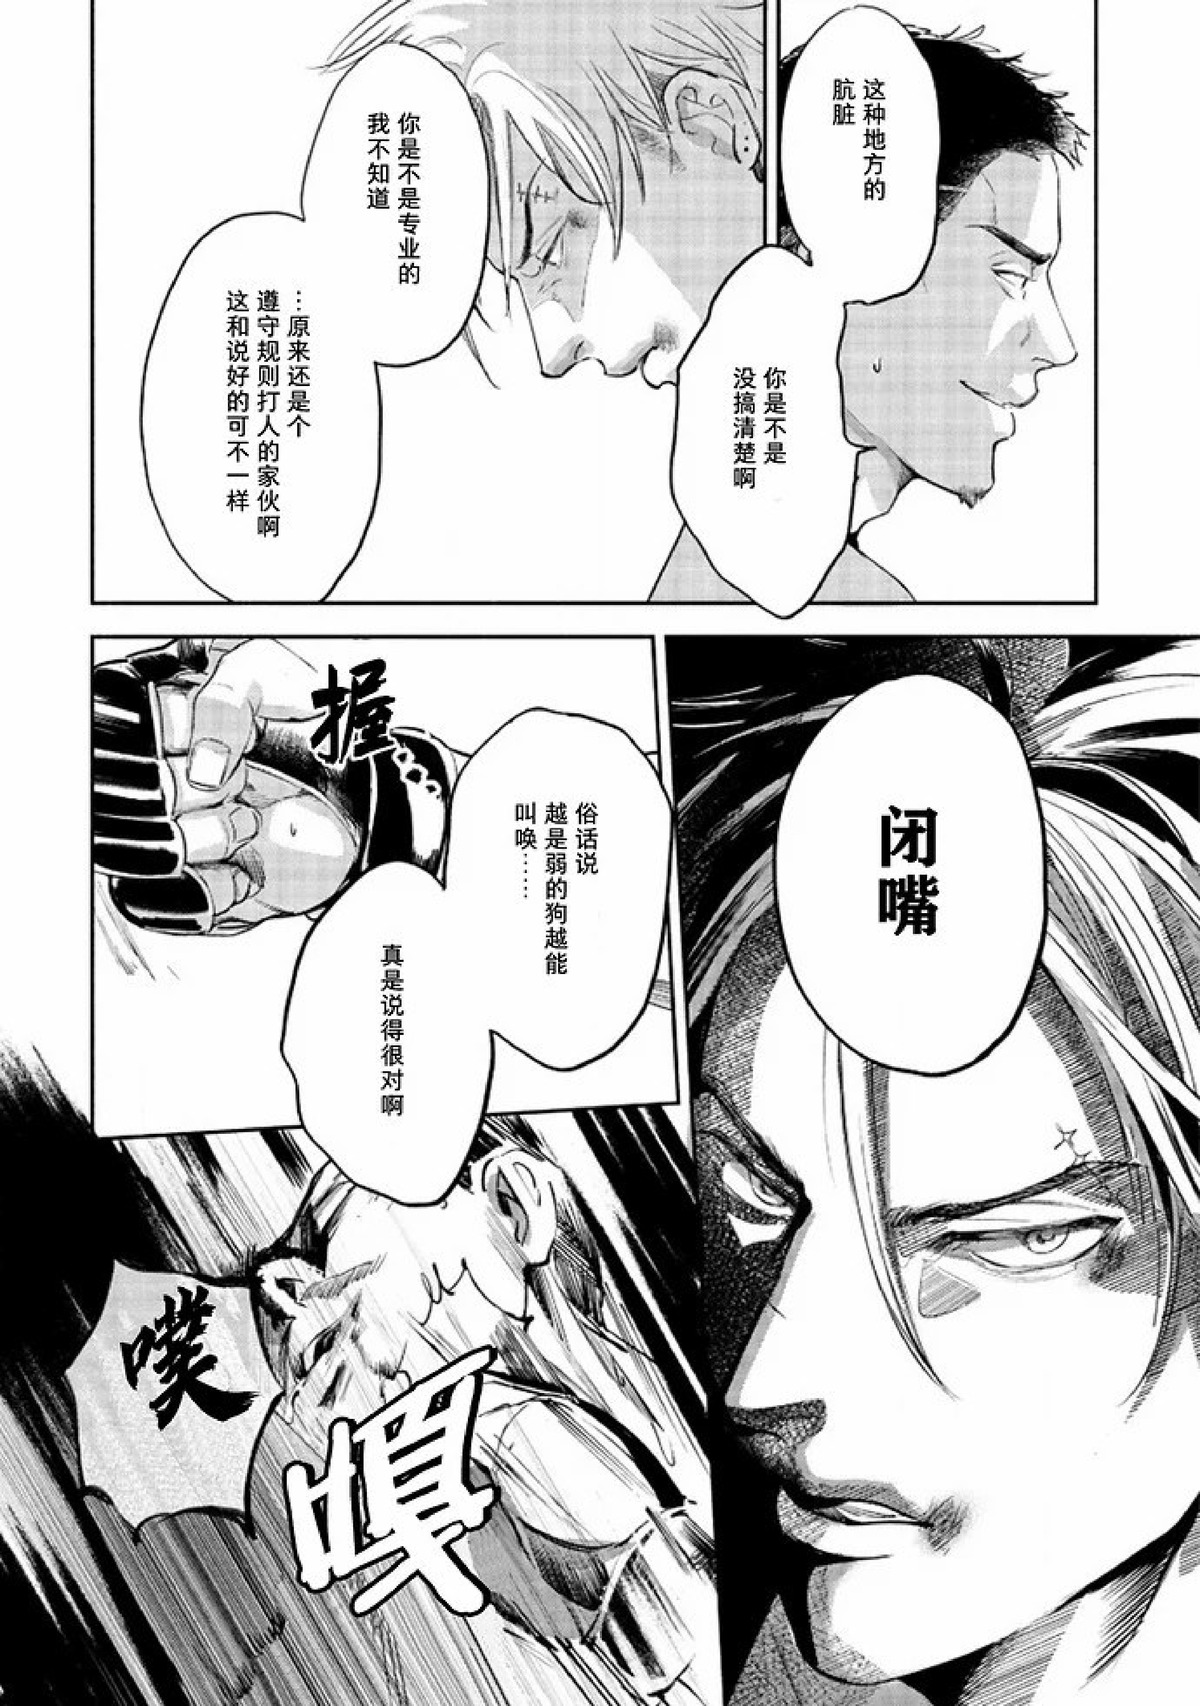 【Two sides of the same coin[腐漫]】漫画-（上卷01-02）章节漫画下拉式图片-70.jpg